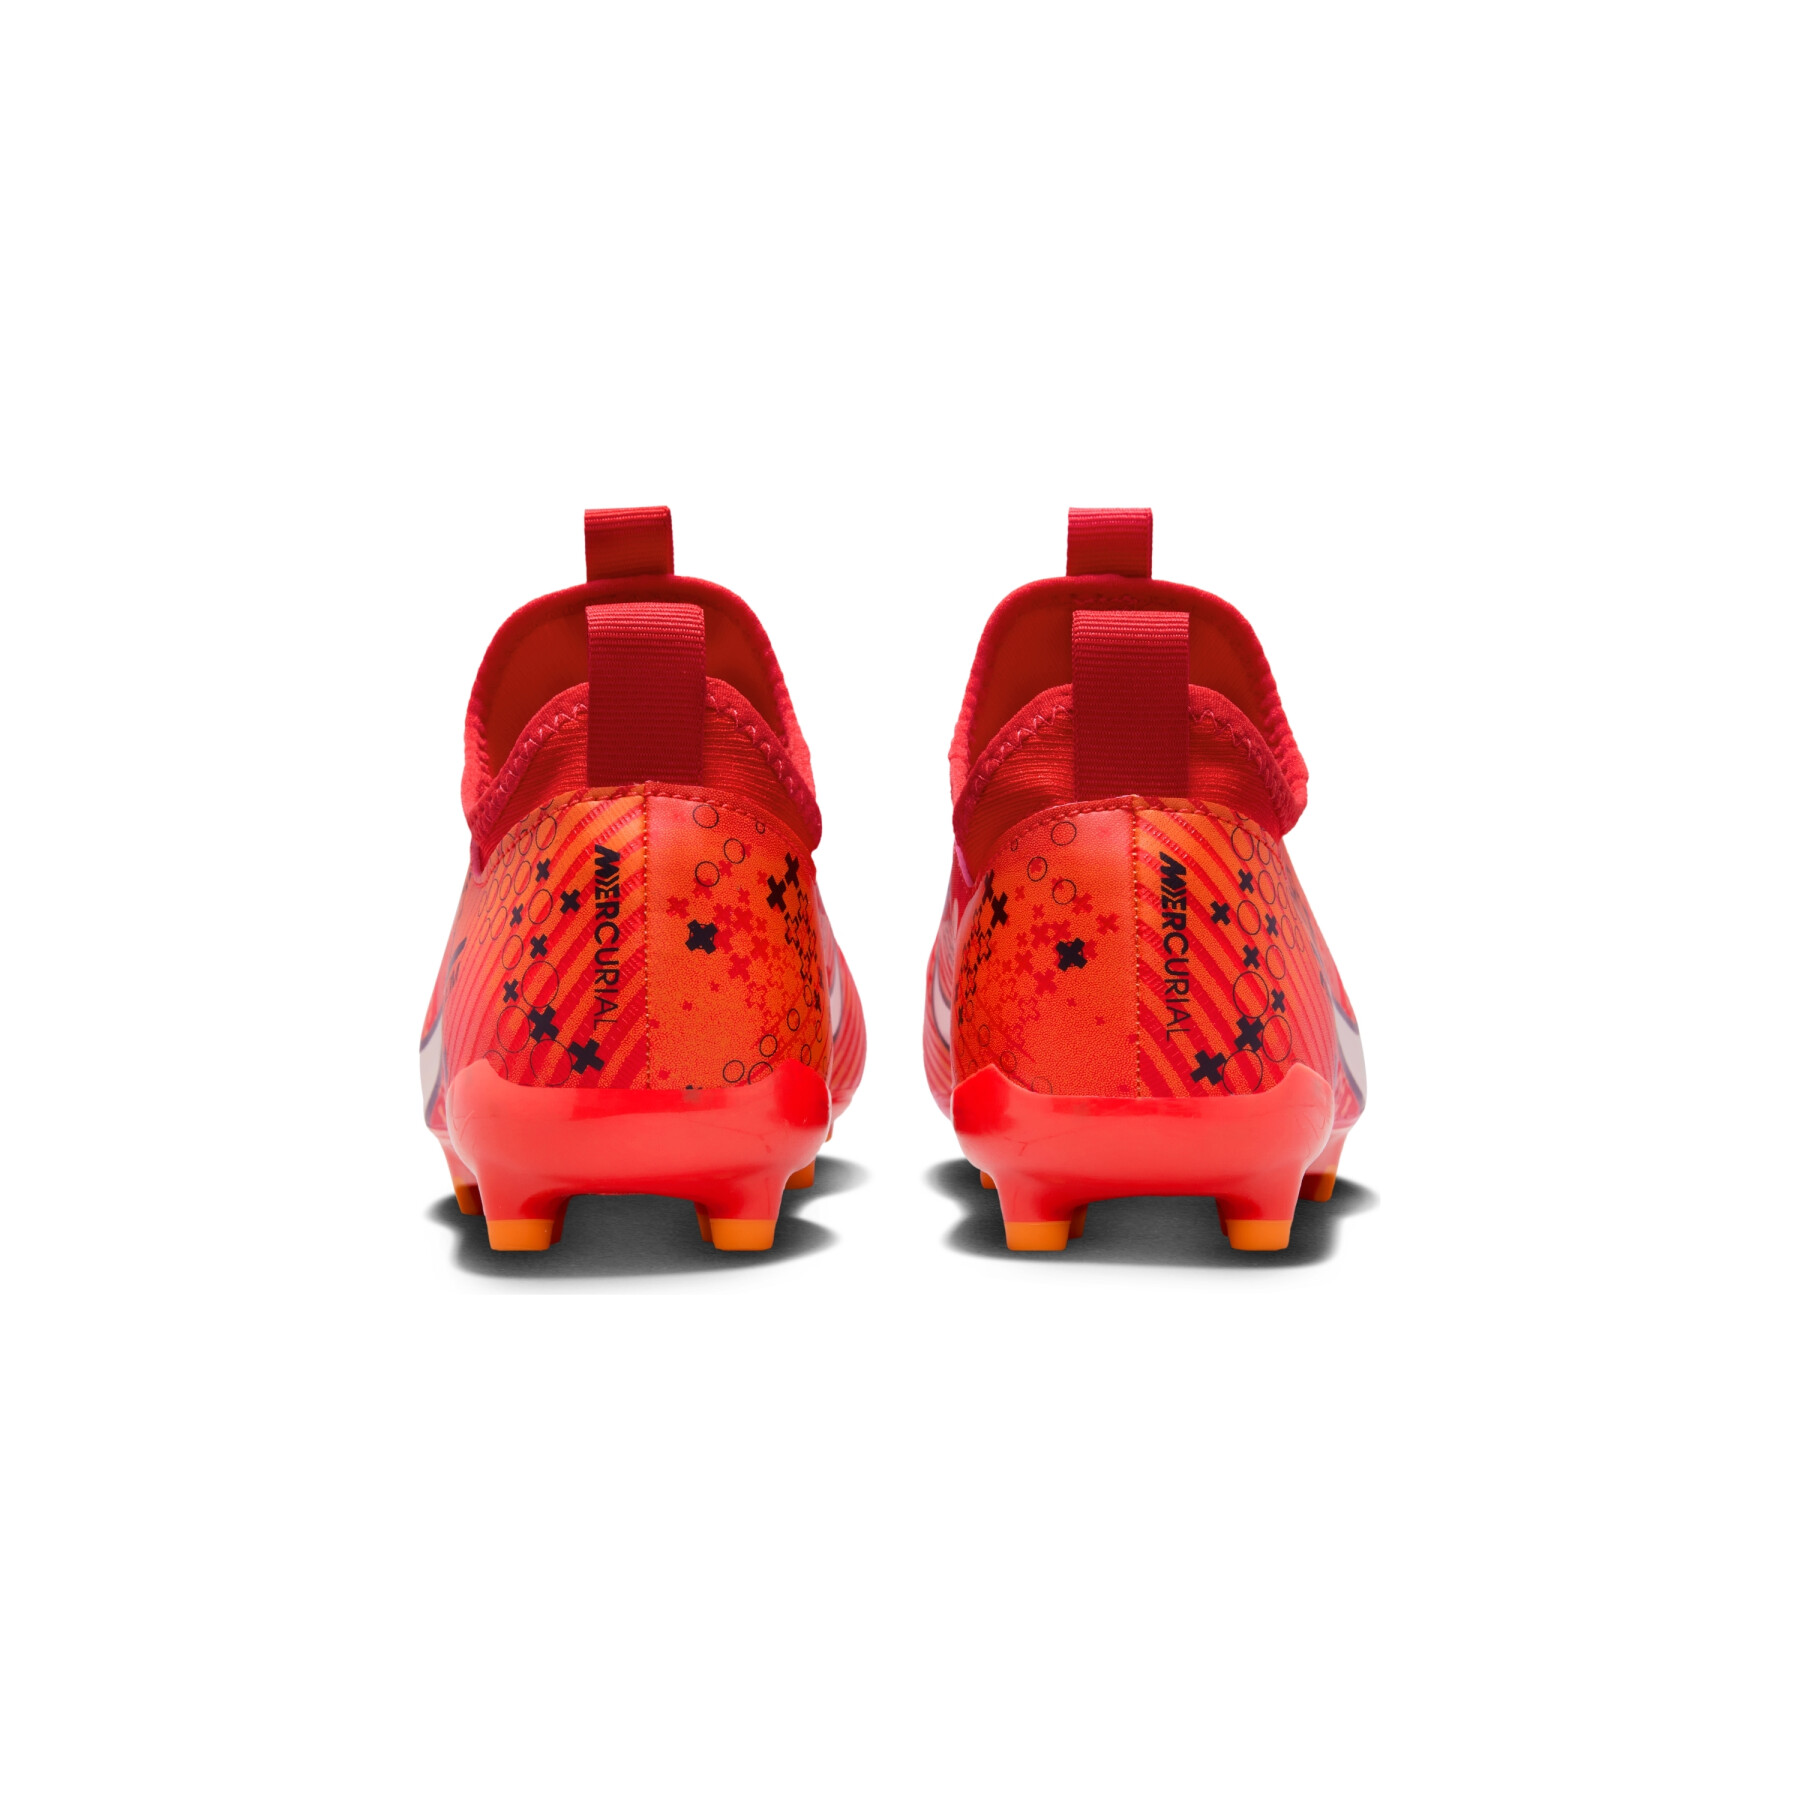 Children's soccer shoes Nike Zoom Vapor 15 Academy MDS FG/MG